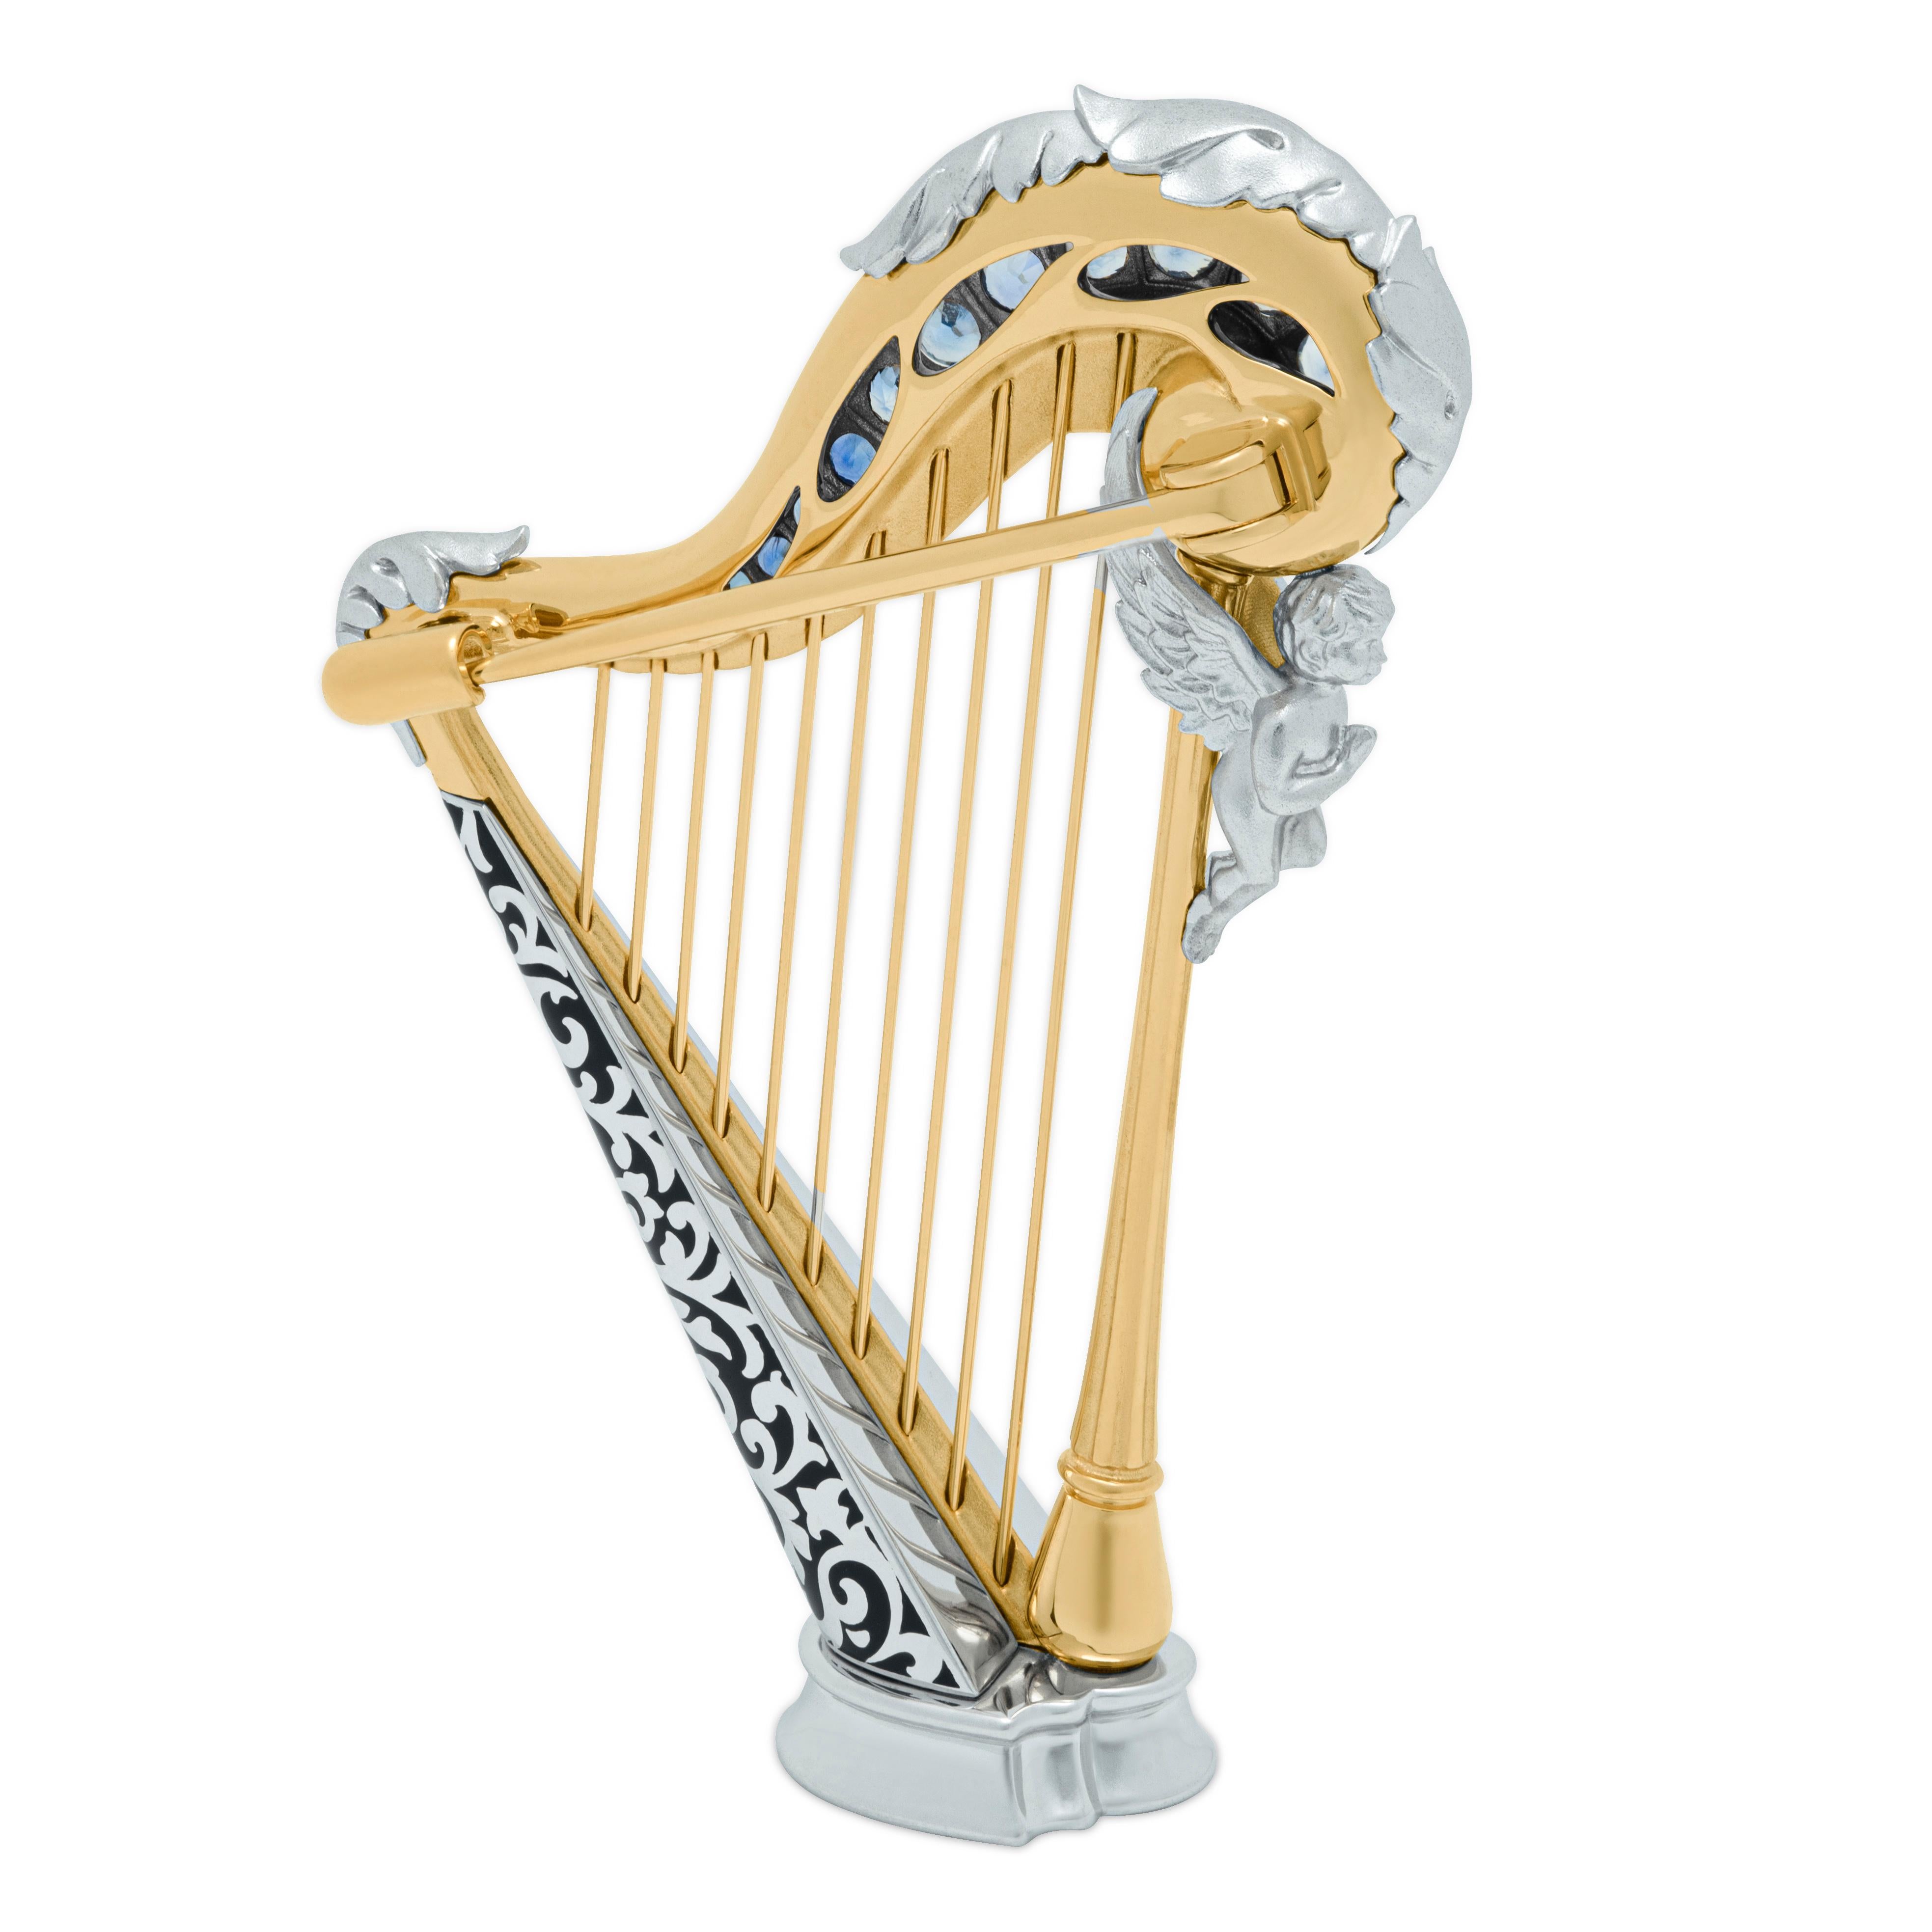 Blue Sapphires 18 Karat White Yellow Gold Harp Brooch
Harps were widely used in the ancient Mediterranean and Middle East, although rare in Greece and Rome; depictions survive from Egypt and Mesopotamia from about 3000 BCE. 
Thanks to its “universal